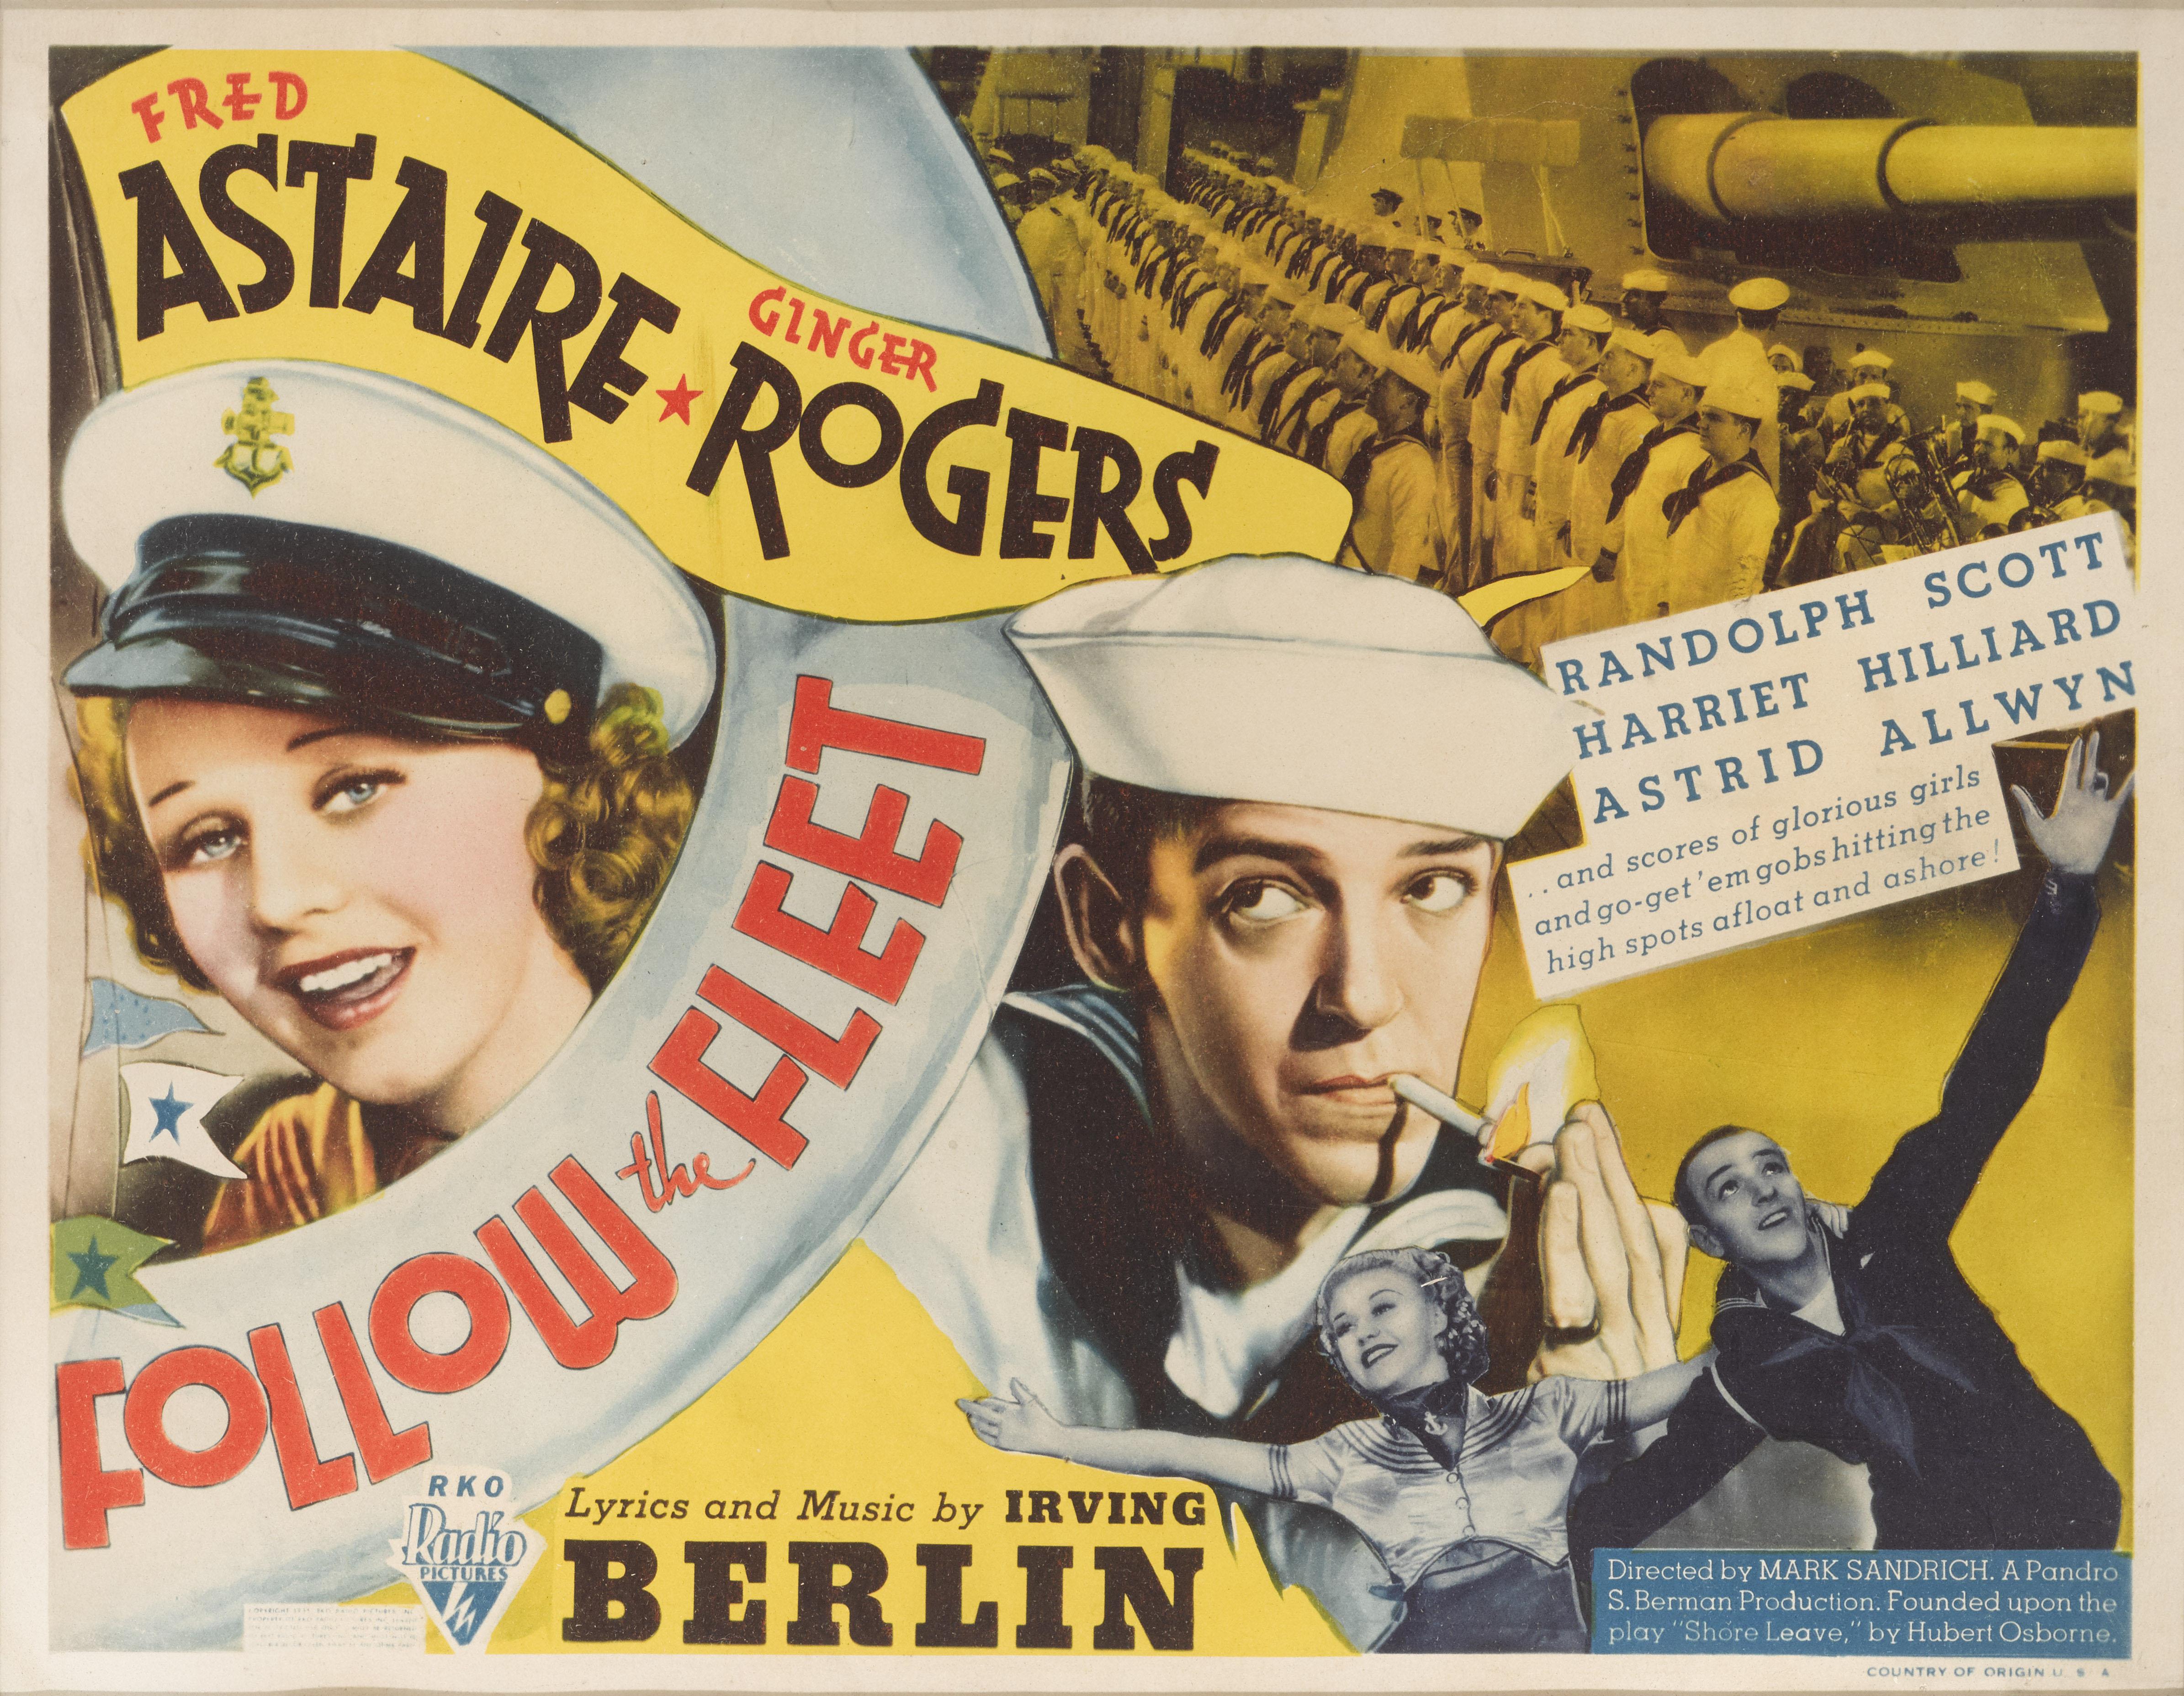 Original US title lobby card for the 1936 Musical comedy Follow the Fleet.
This film starred Fred Astaire and Ginger Rogers and was directed by Mark Sandrich.
This Title card is conservation framed with UV plexiglass in an Obeche wood frame with